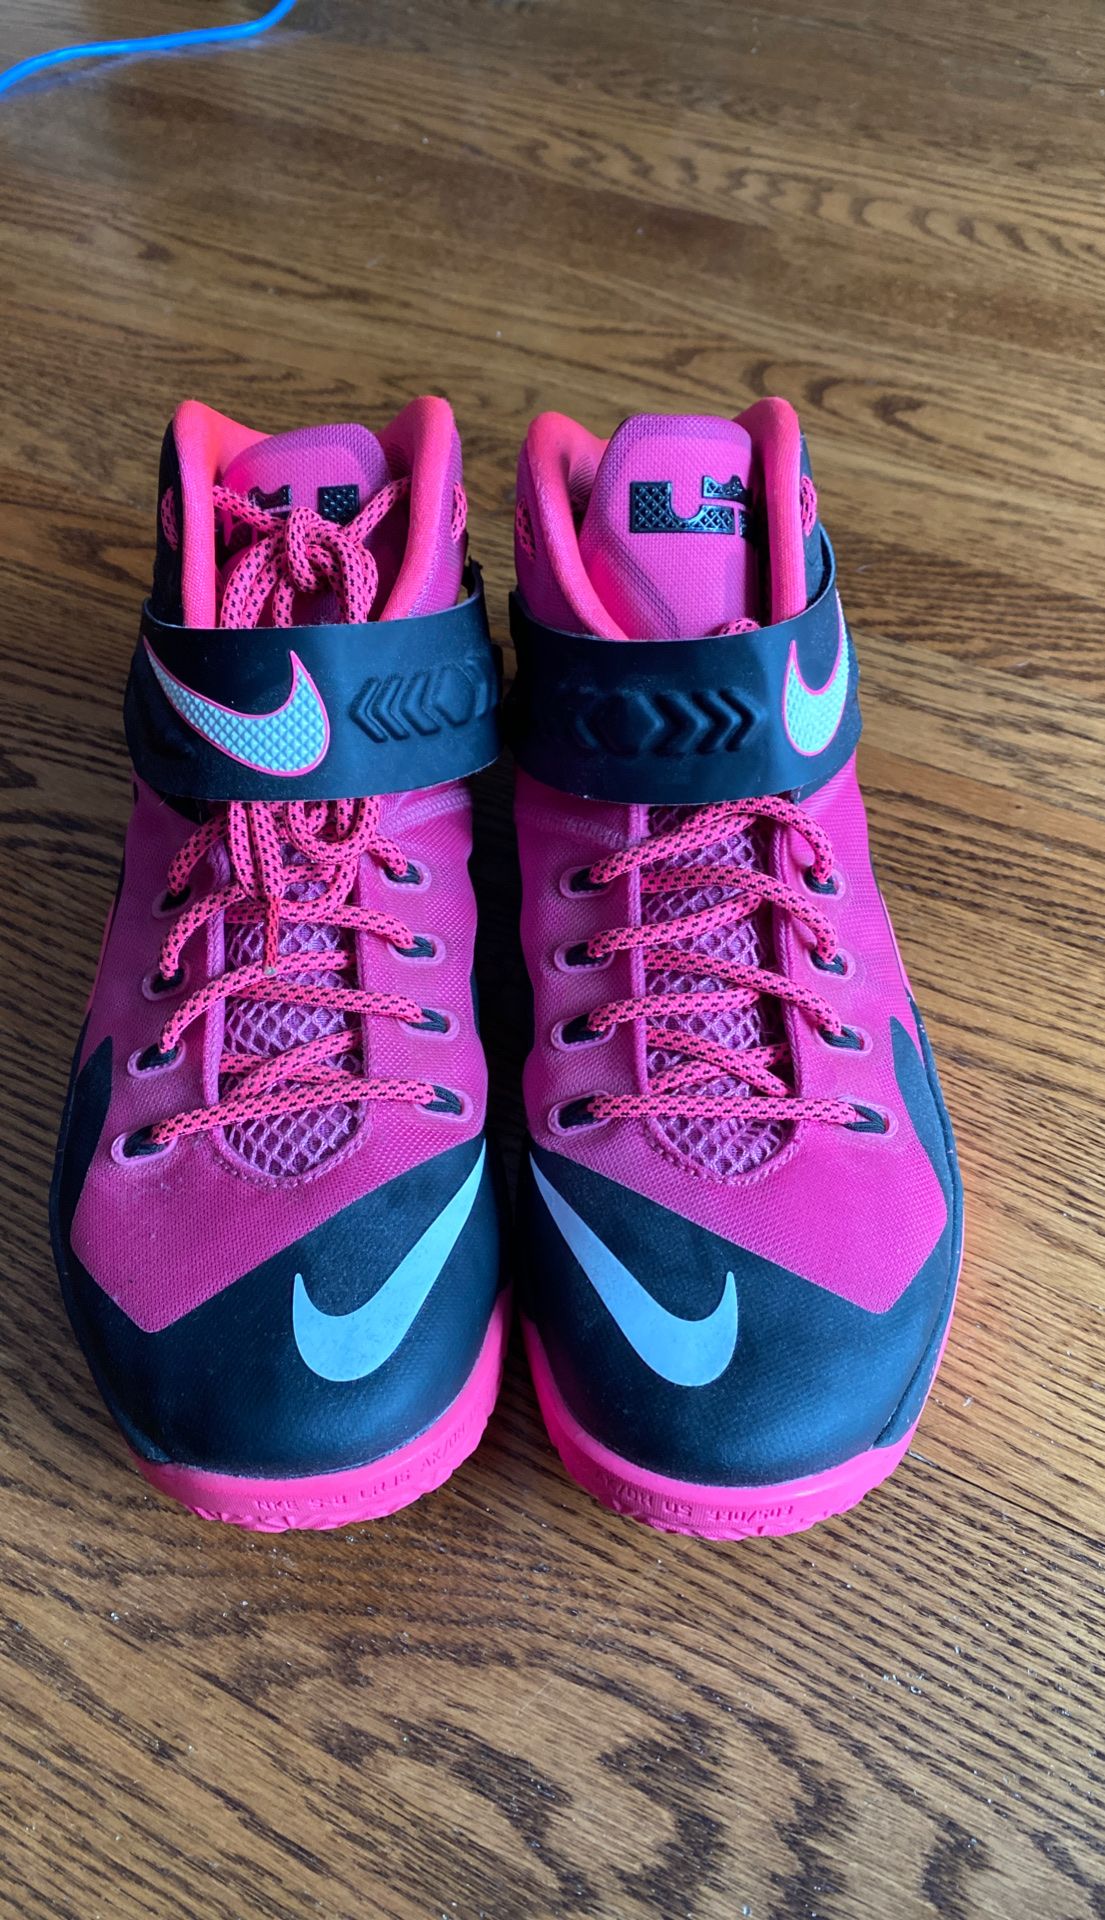 Nike Mens Lebron Soldier VIII 8 Shoes Breast Cancer, Pink. Size 10.5